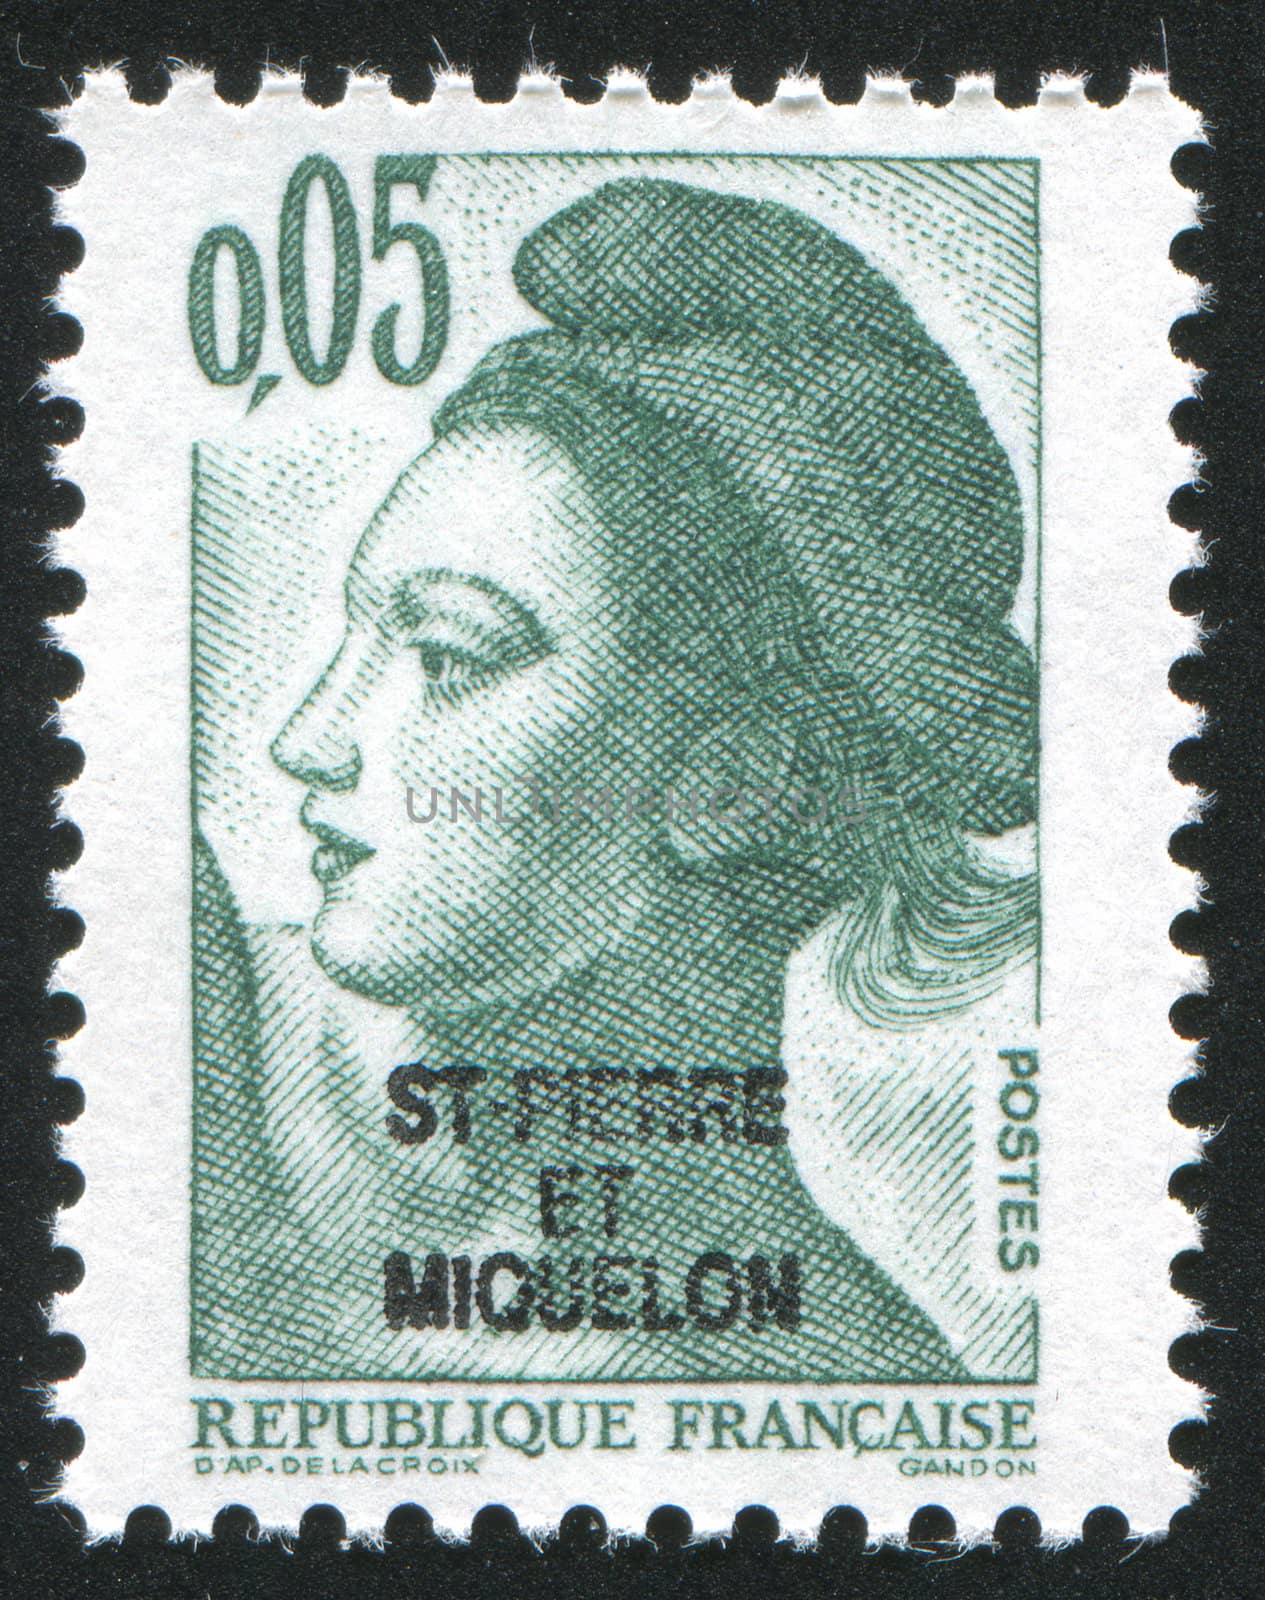 FRANCE - CIRCA 1981: stamp printed by France, shows Liberty, after Delacroix, circa 1981